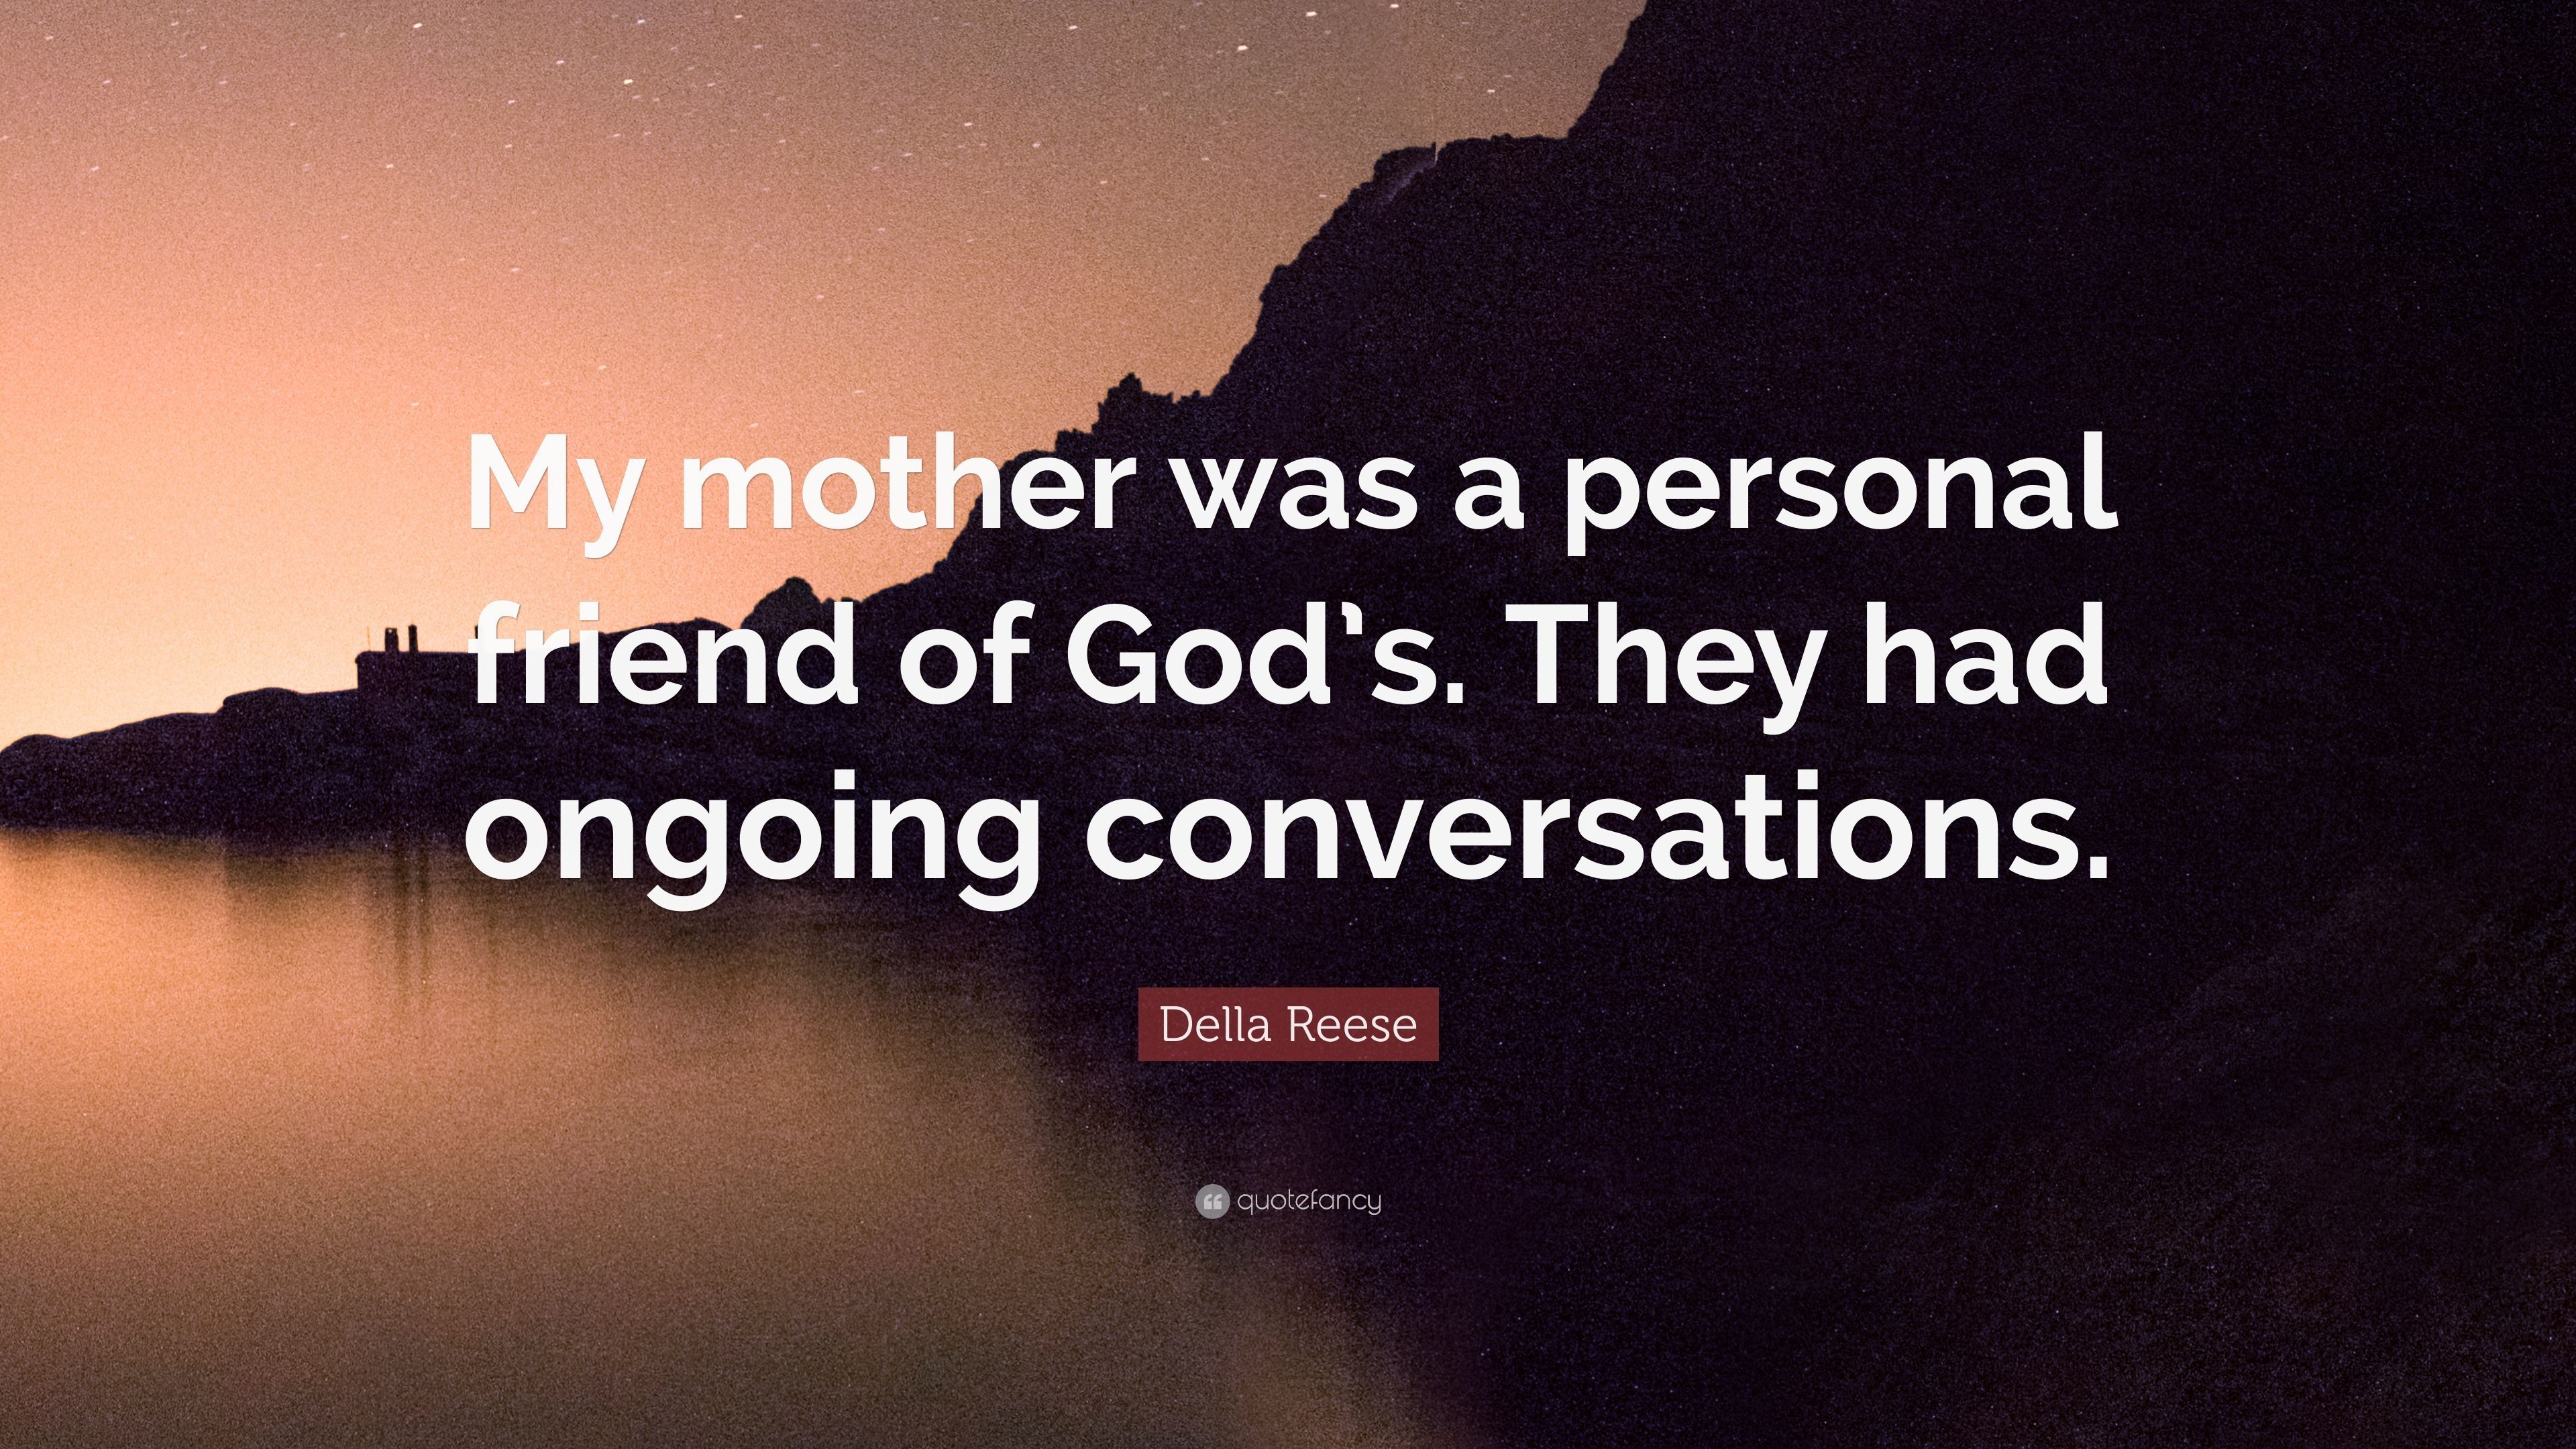 Della Reese Quote: "My mother was a personal friend of God's. 